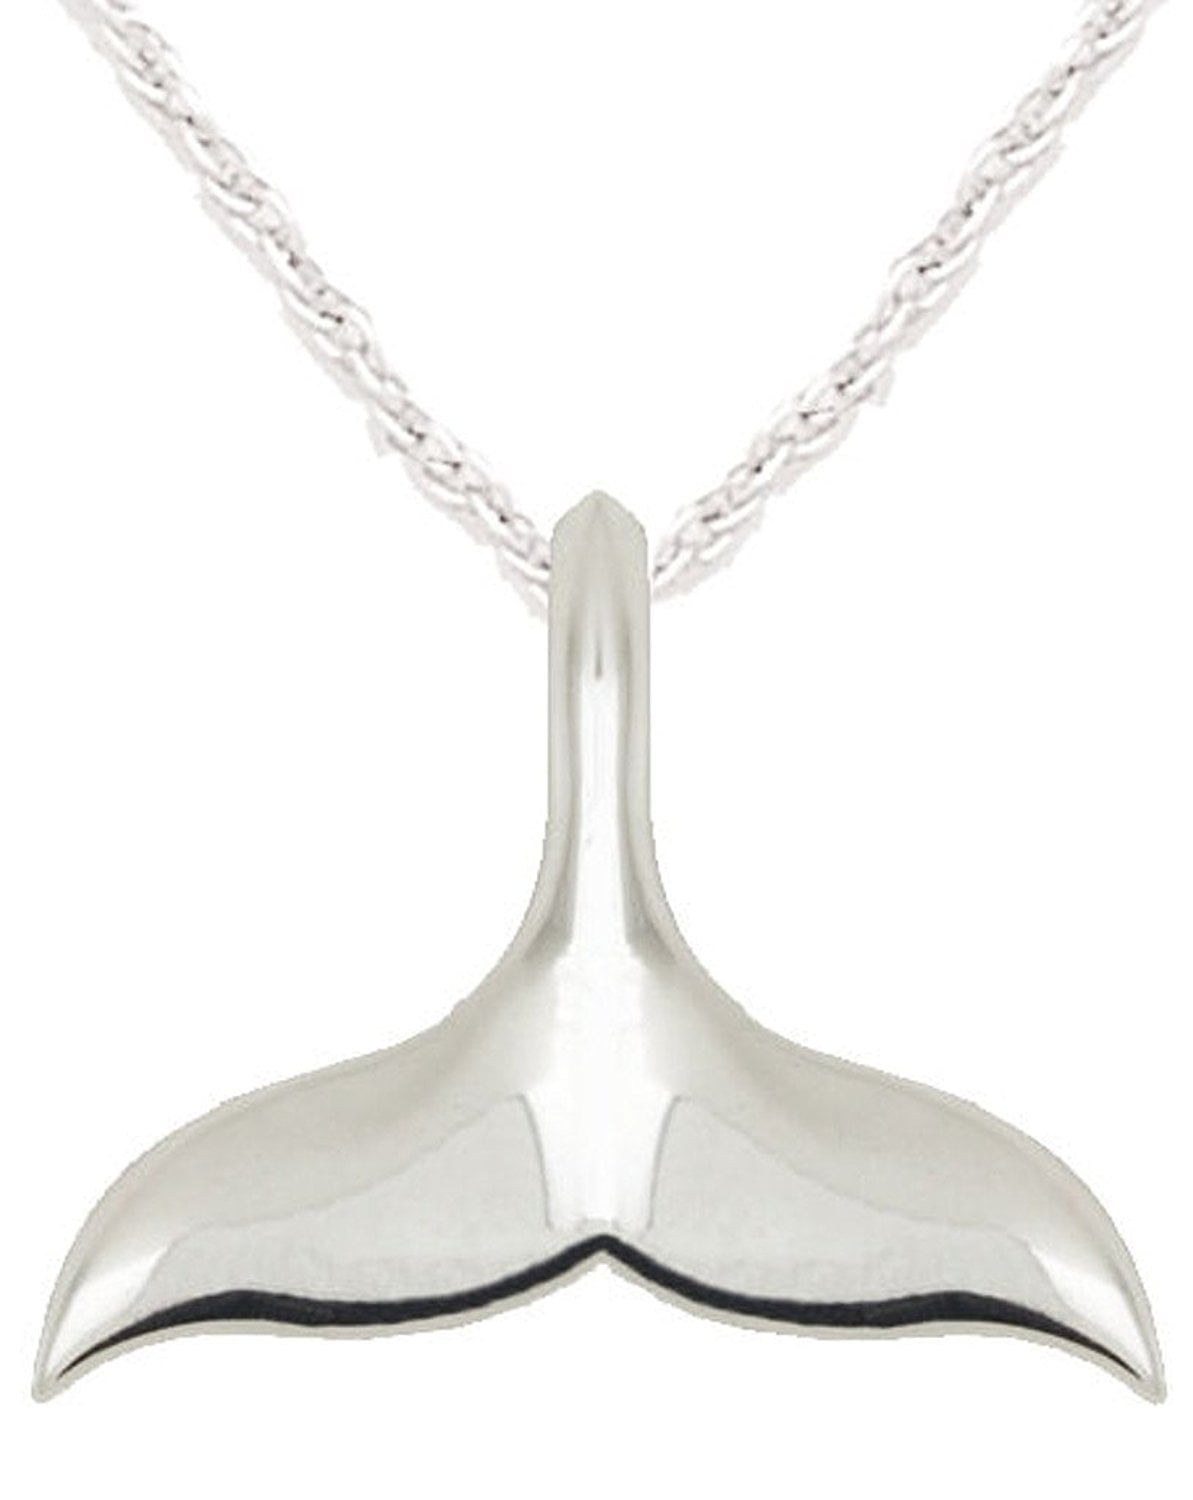 US Jewels And Gems 0.925 Sterling Silver Whale Aquatic Pendant Necklace 